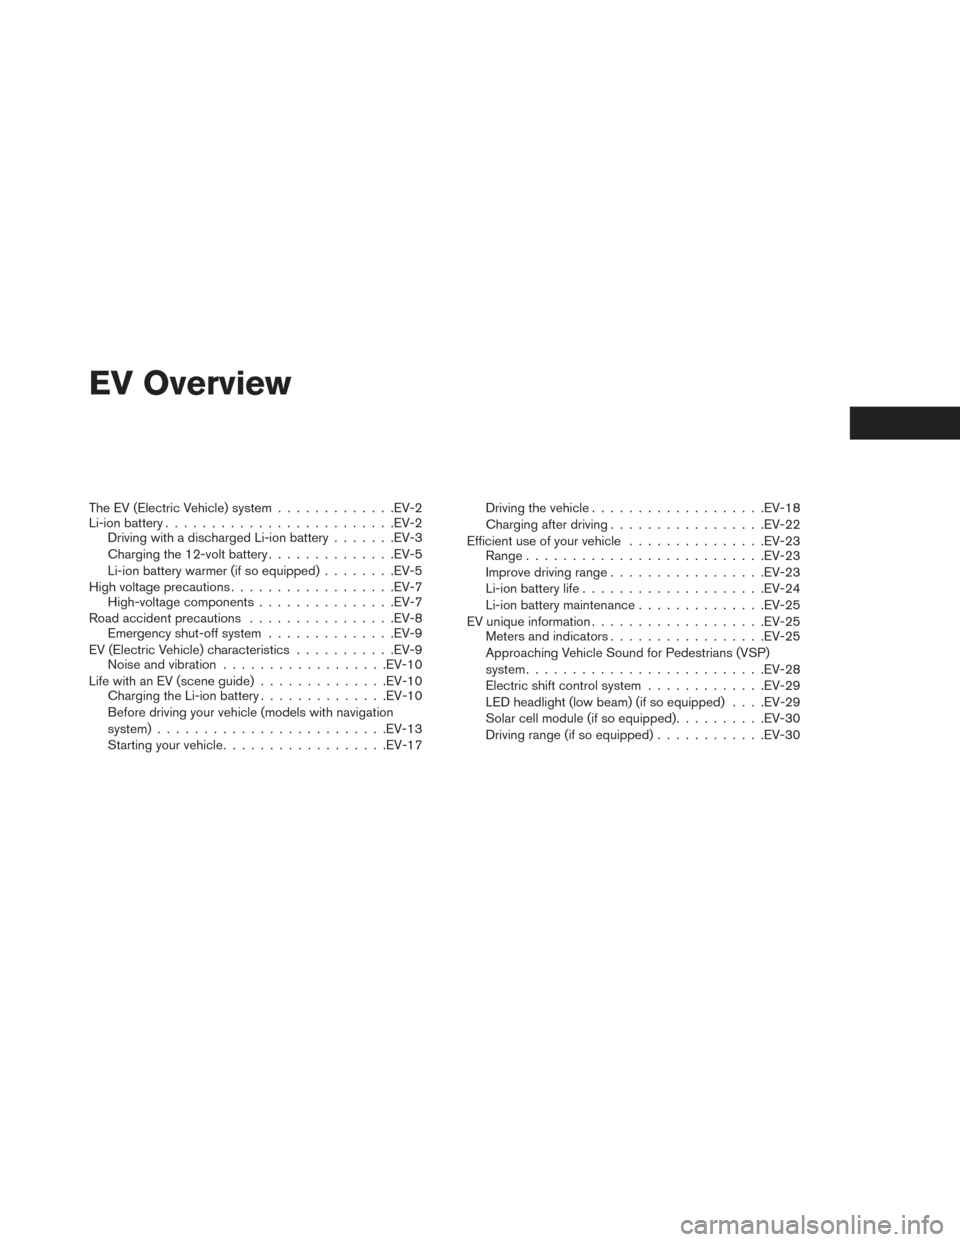 NISSAN LEAF 2016 1.G Owners Manual EV Overview
The EV (Electric Vehicle) system.............EV-2
Li-ion battery ........................ .EV-2
Driving with a discharged Li-ion battery .......EV-3
Charging the 12-volt battery ..........